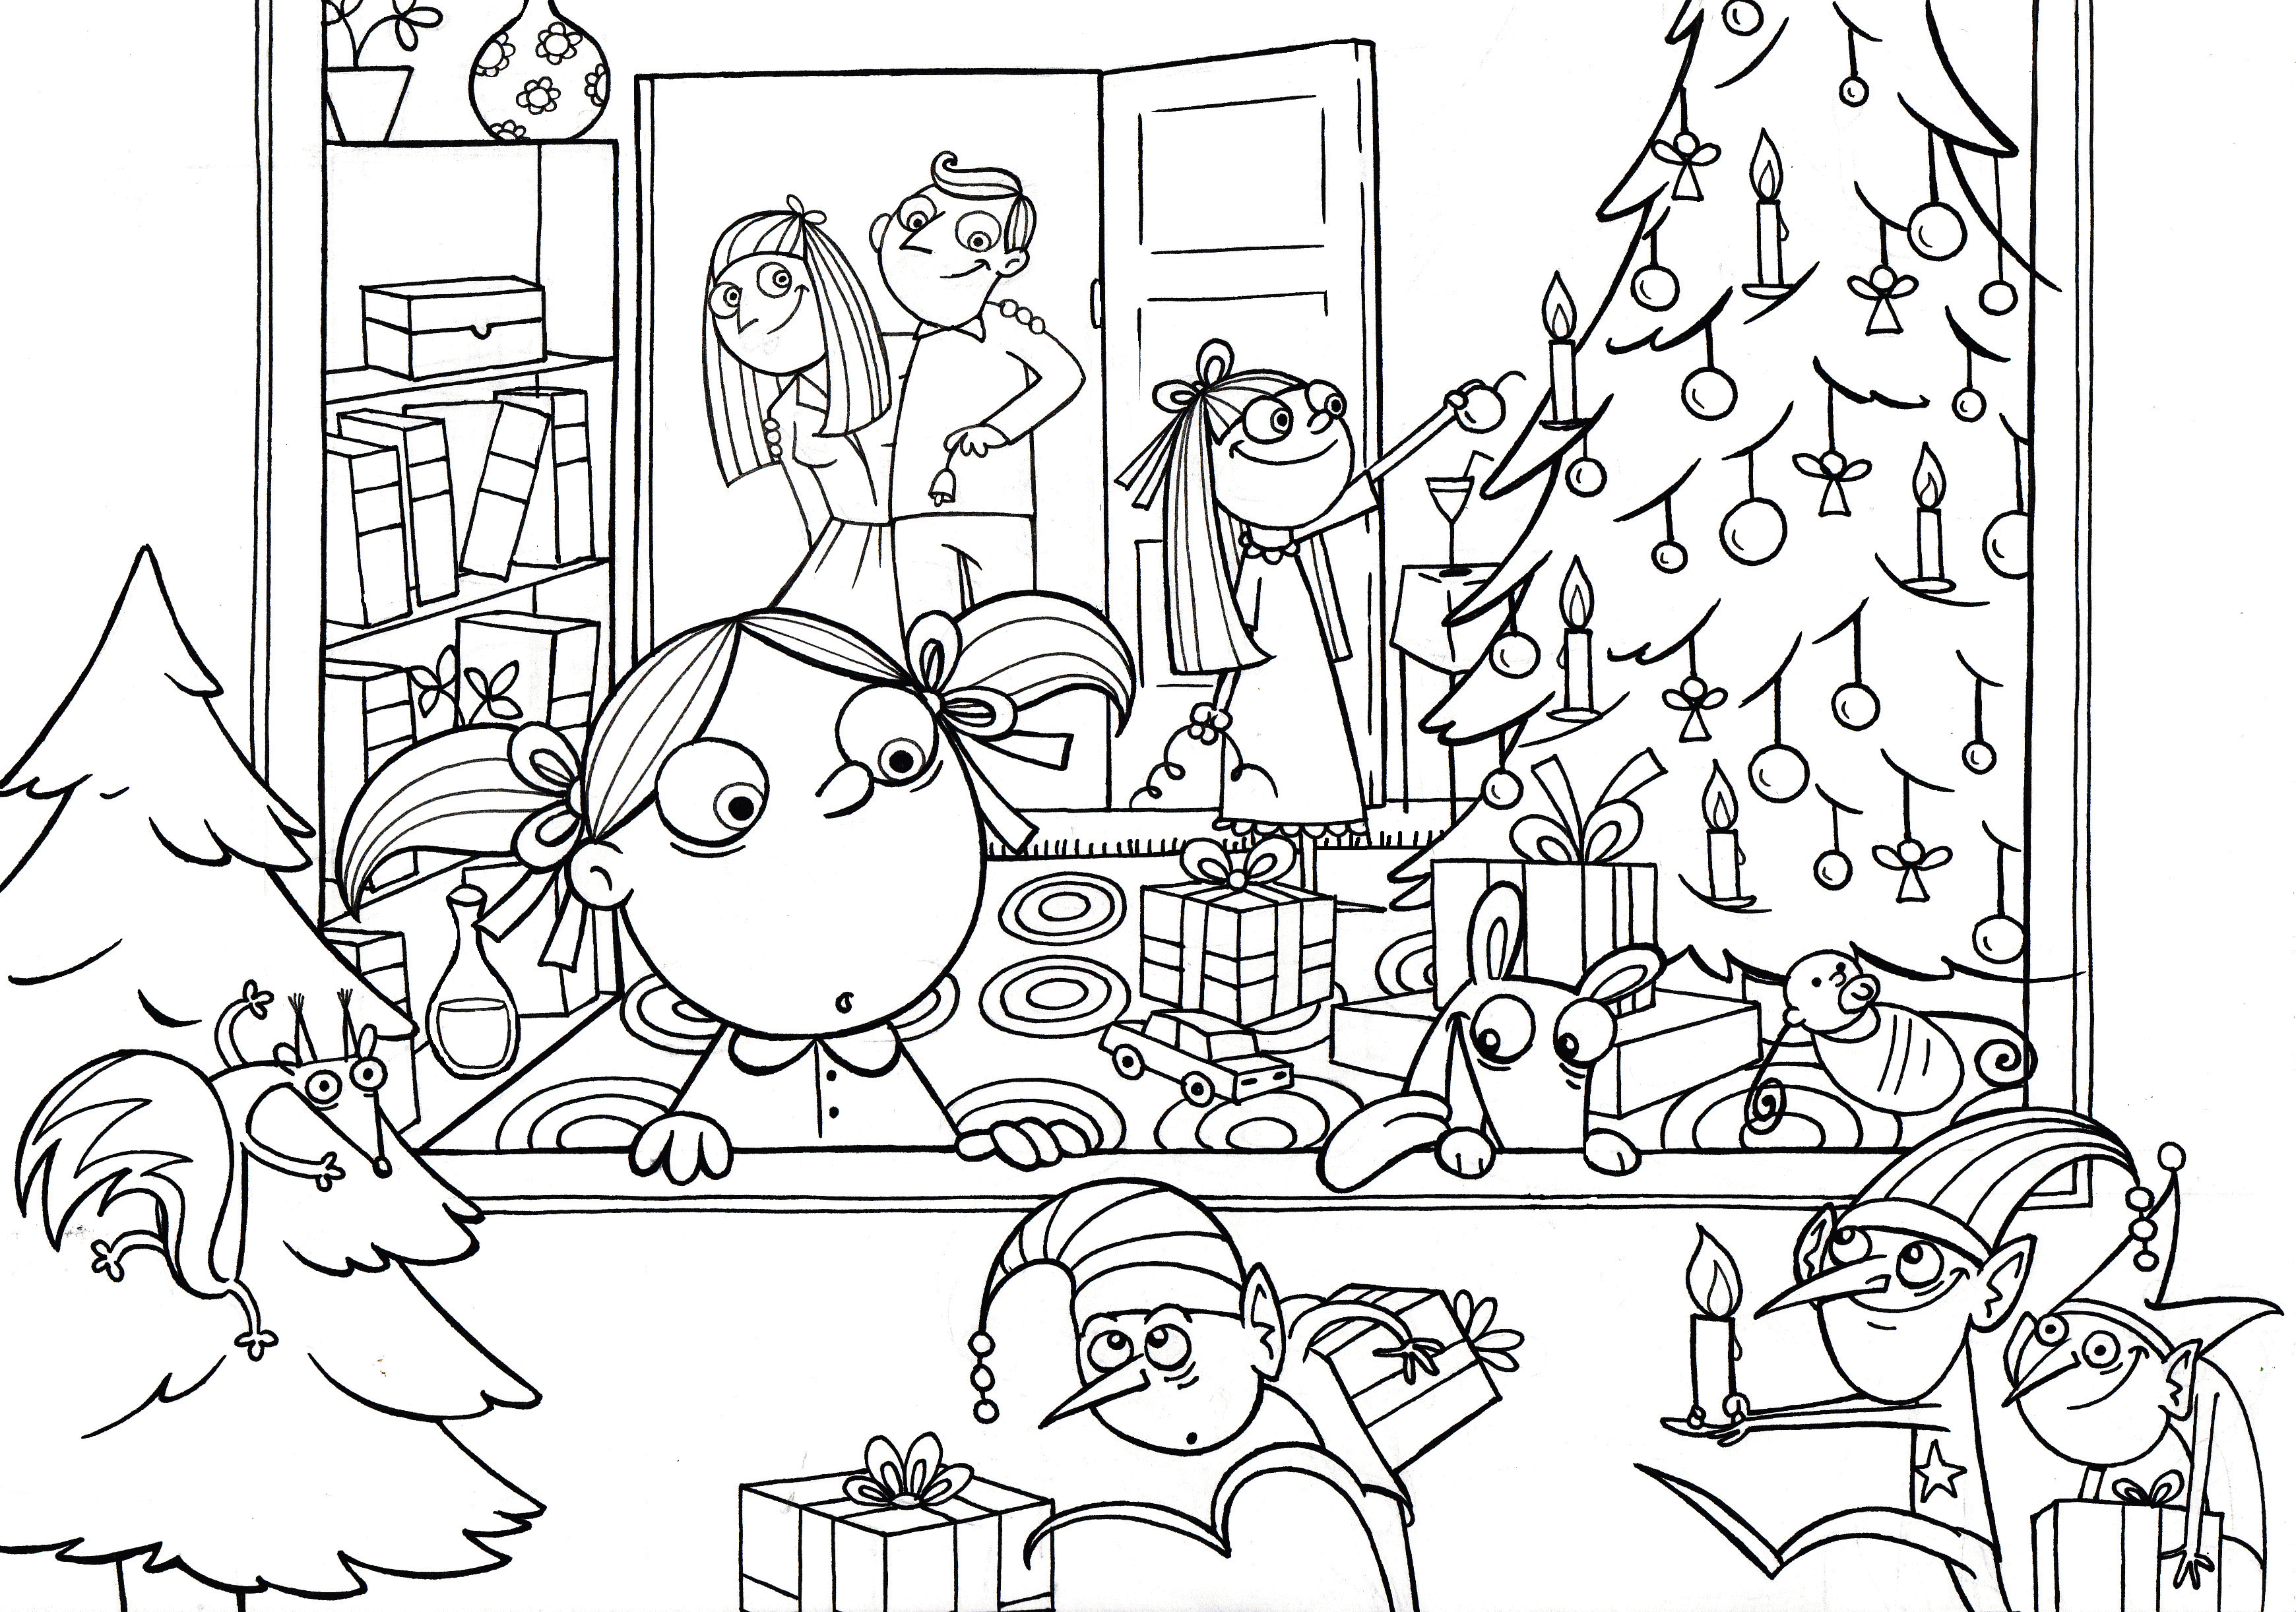 Christmas santa claus coloring pages | www.veupropia.org